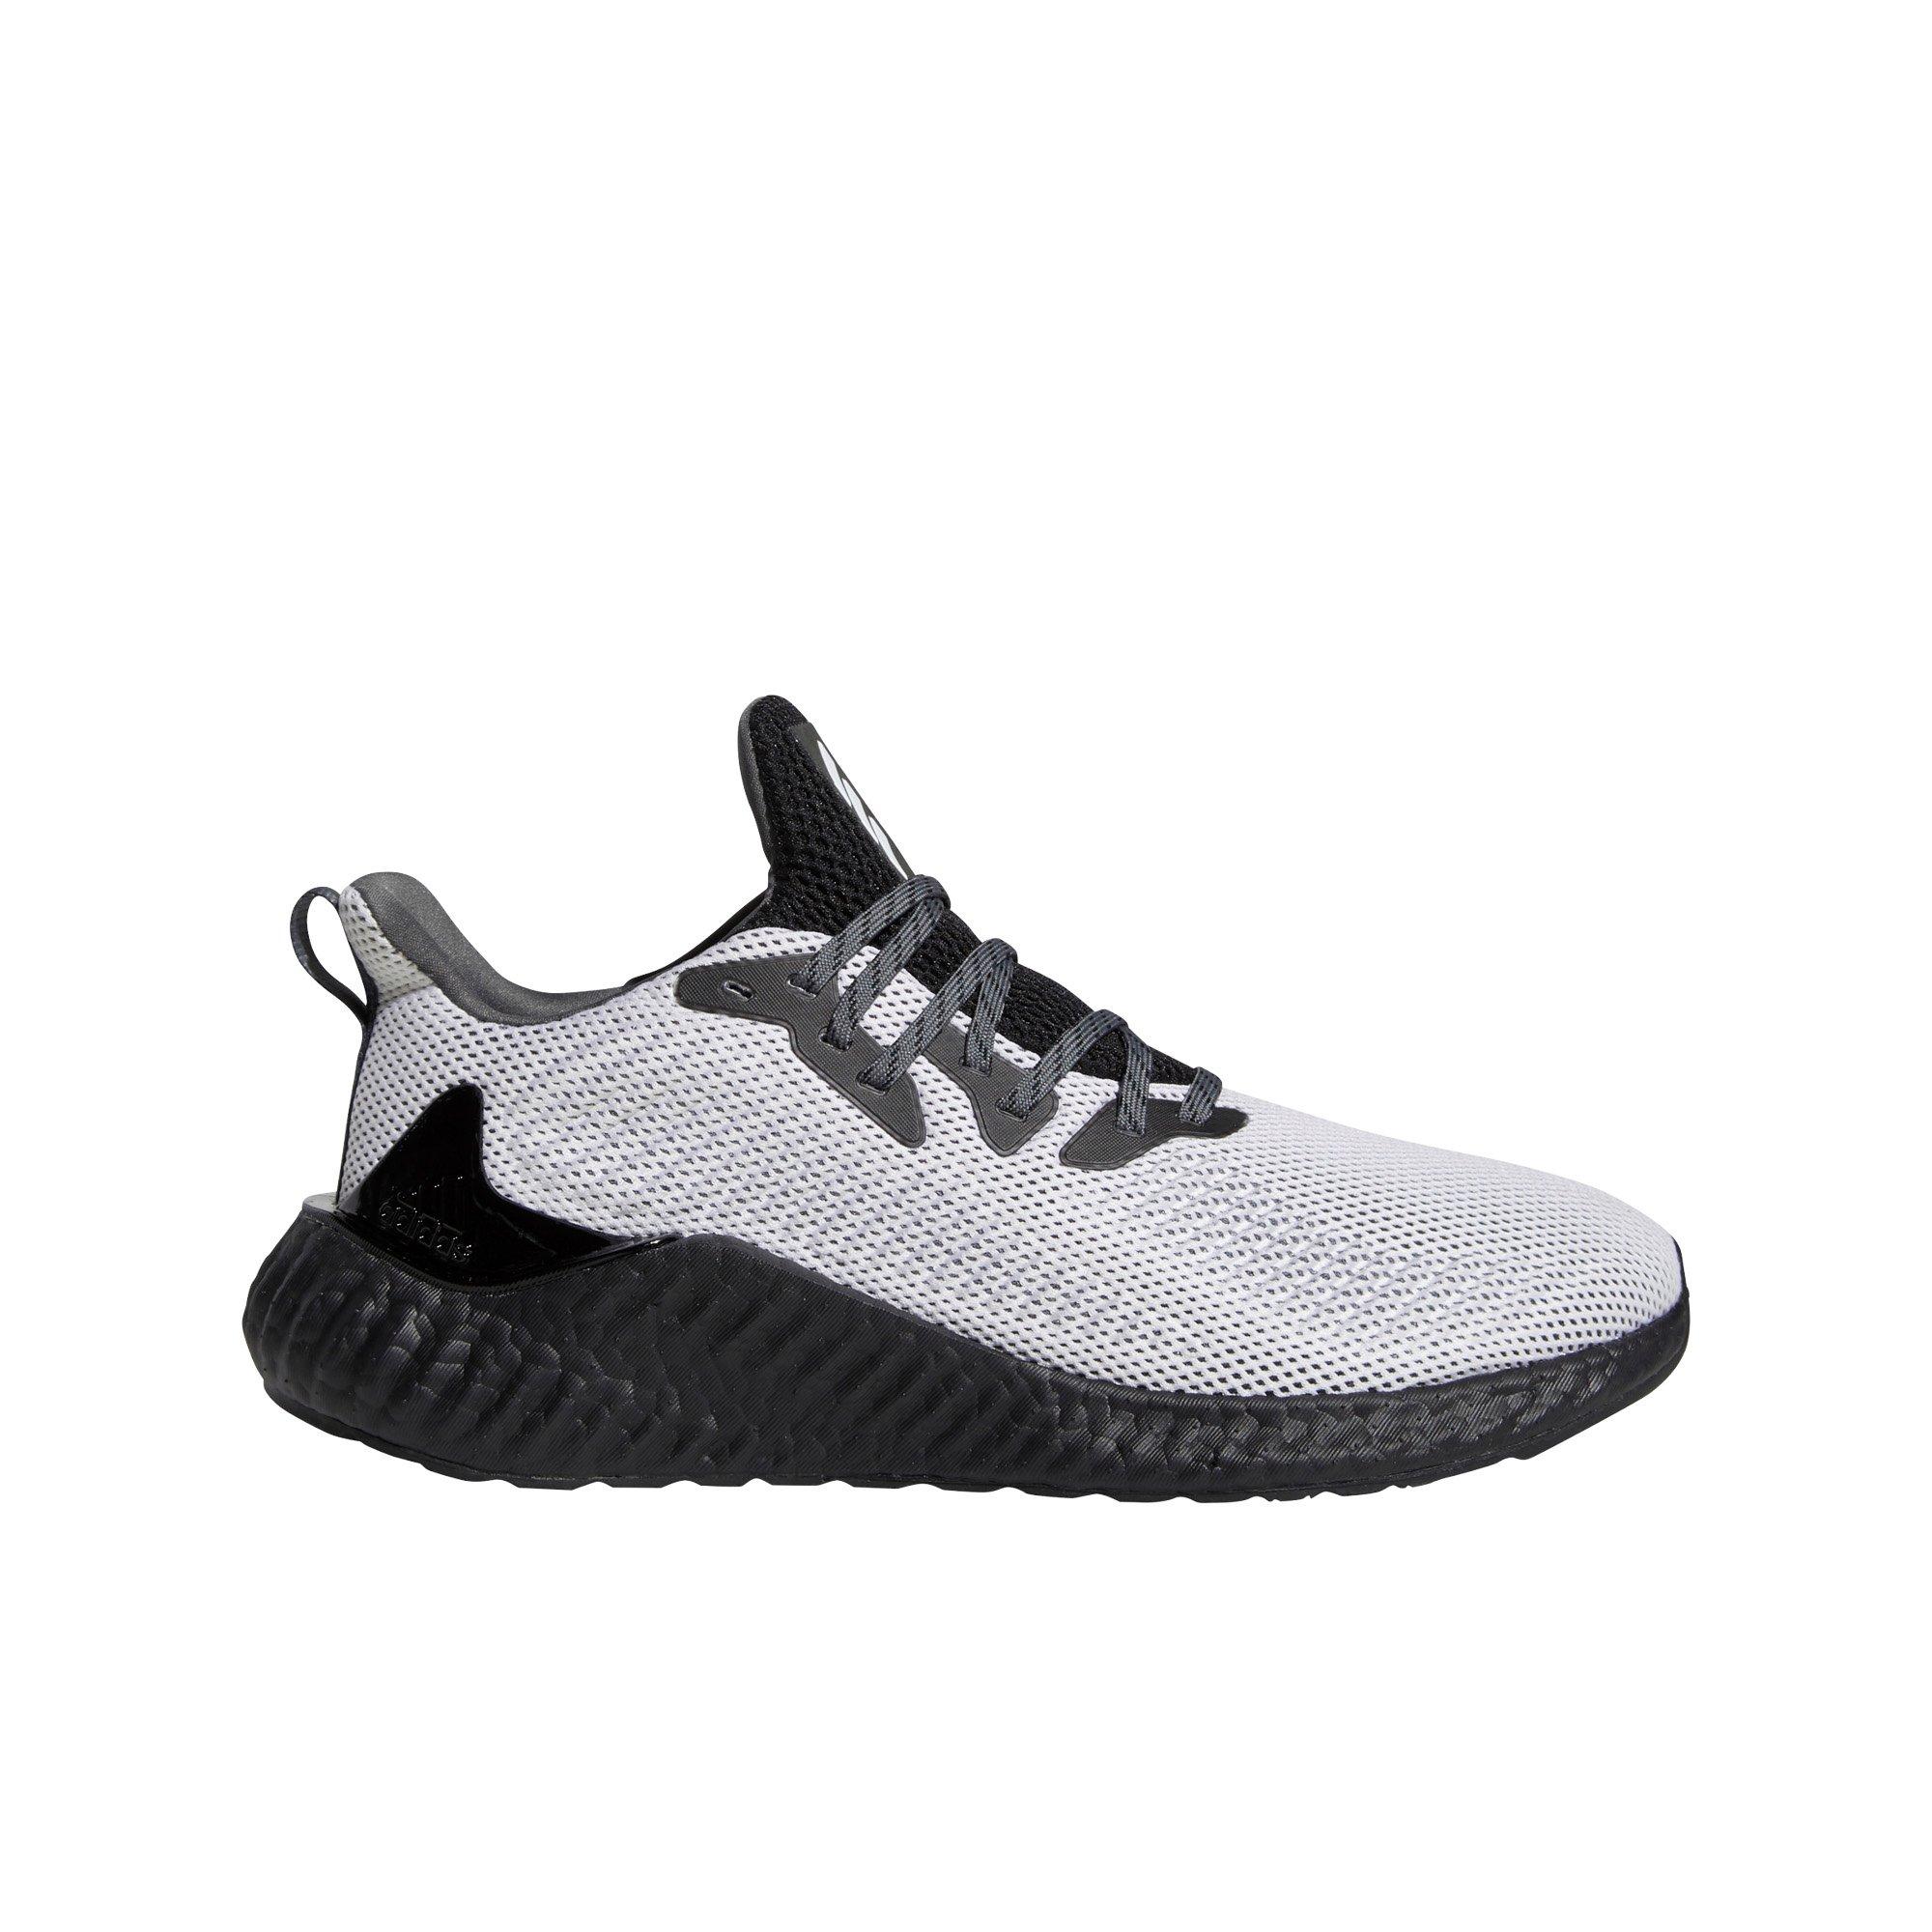 adidas white and black running shoes